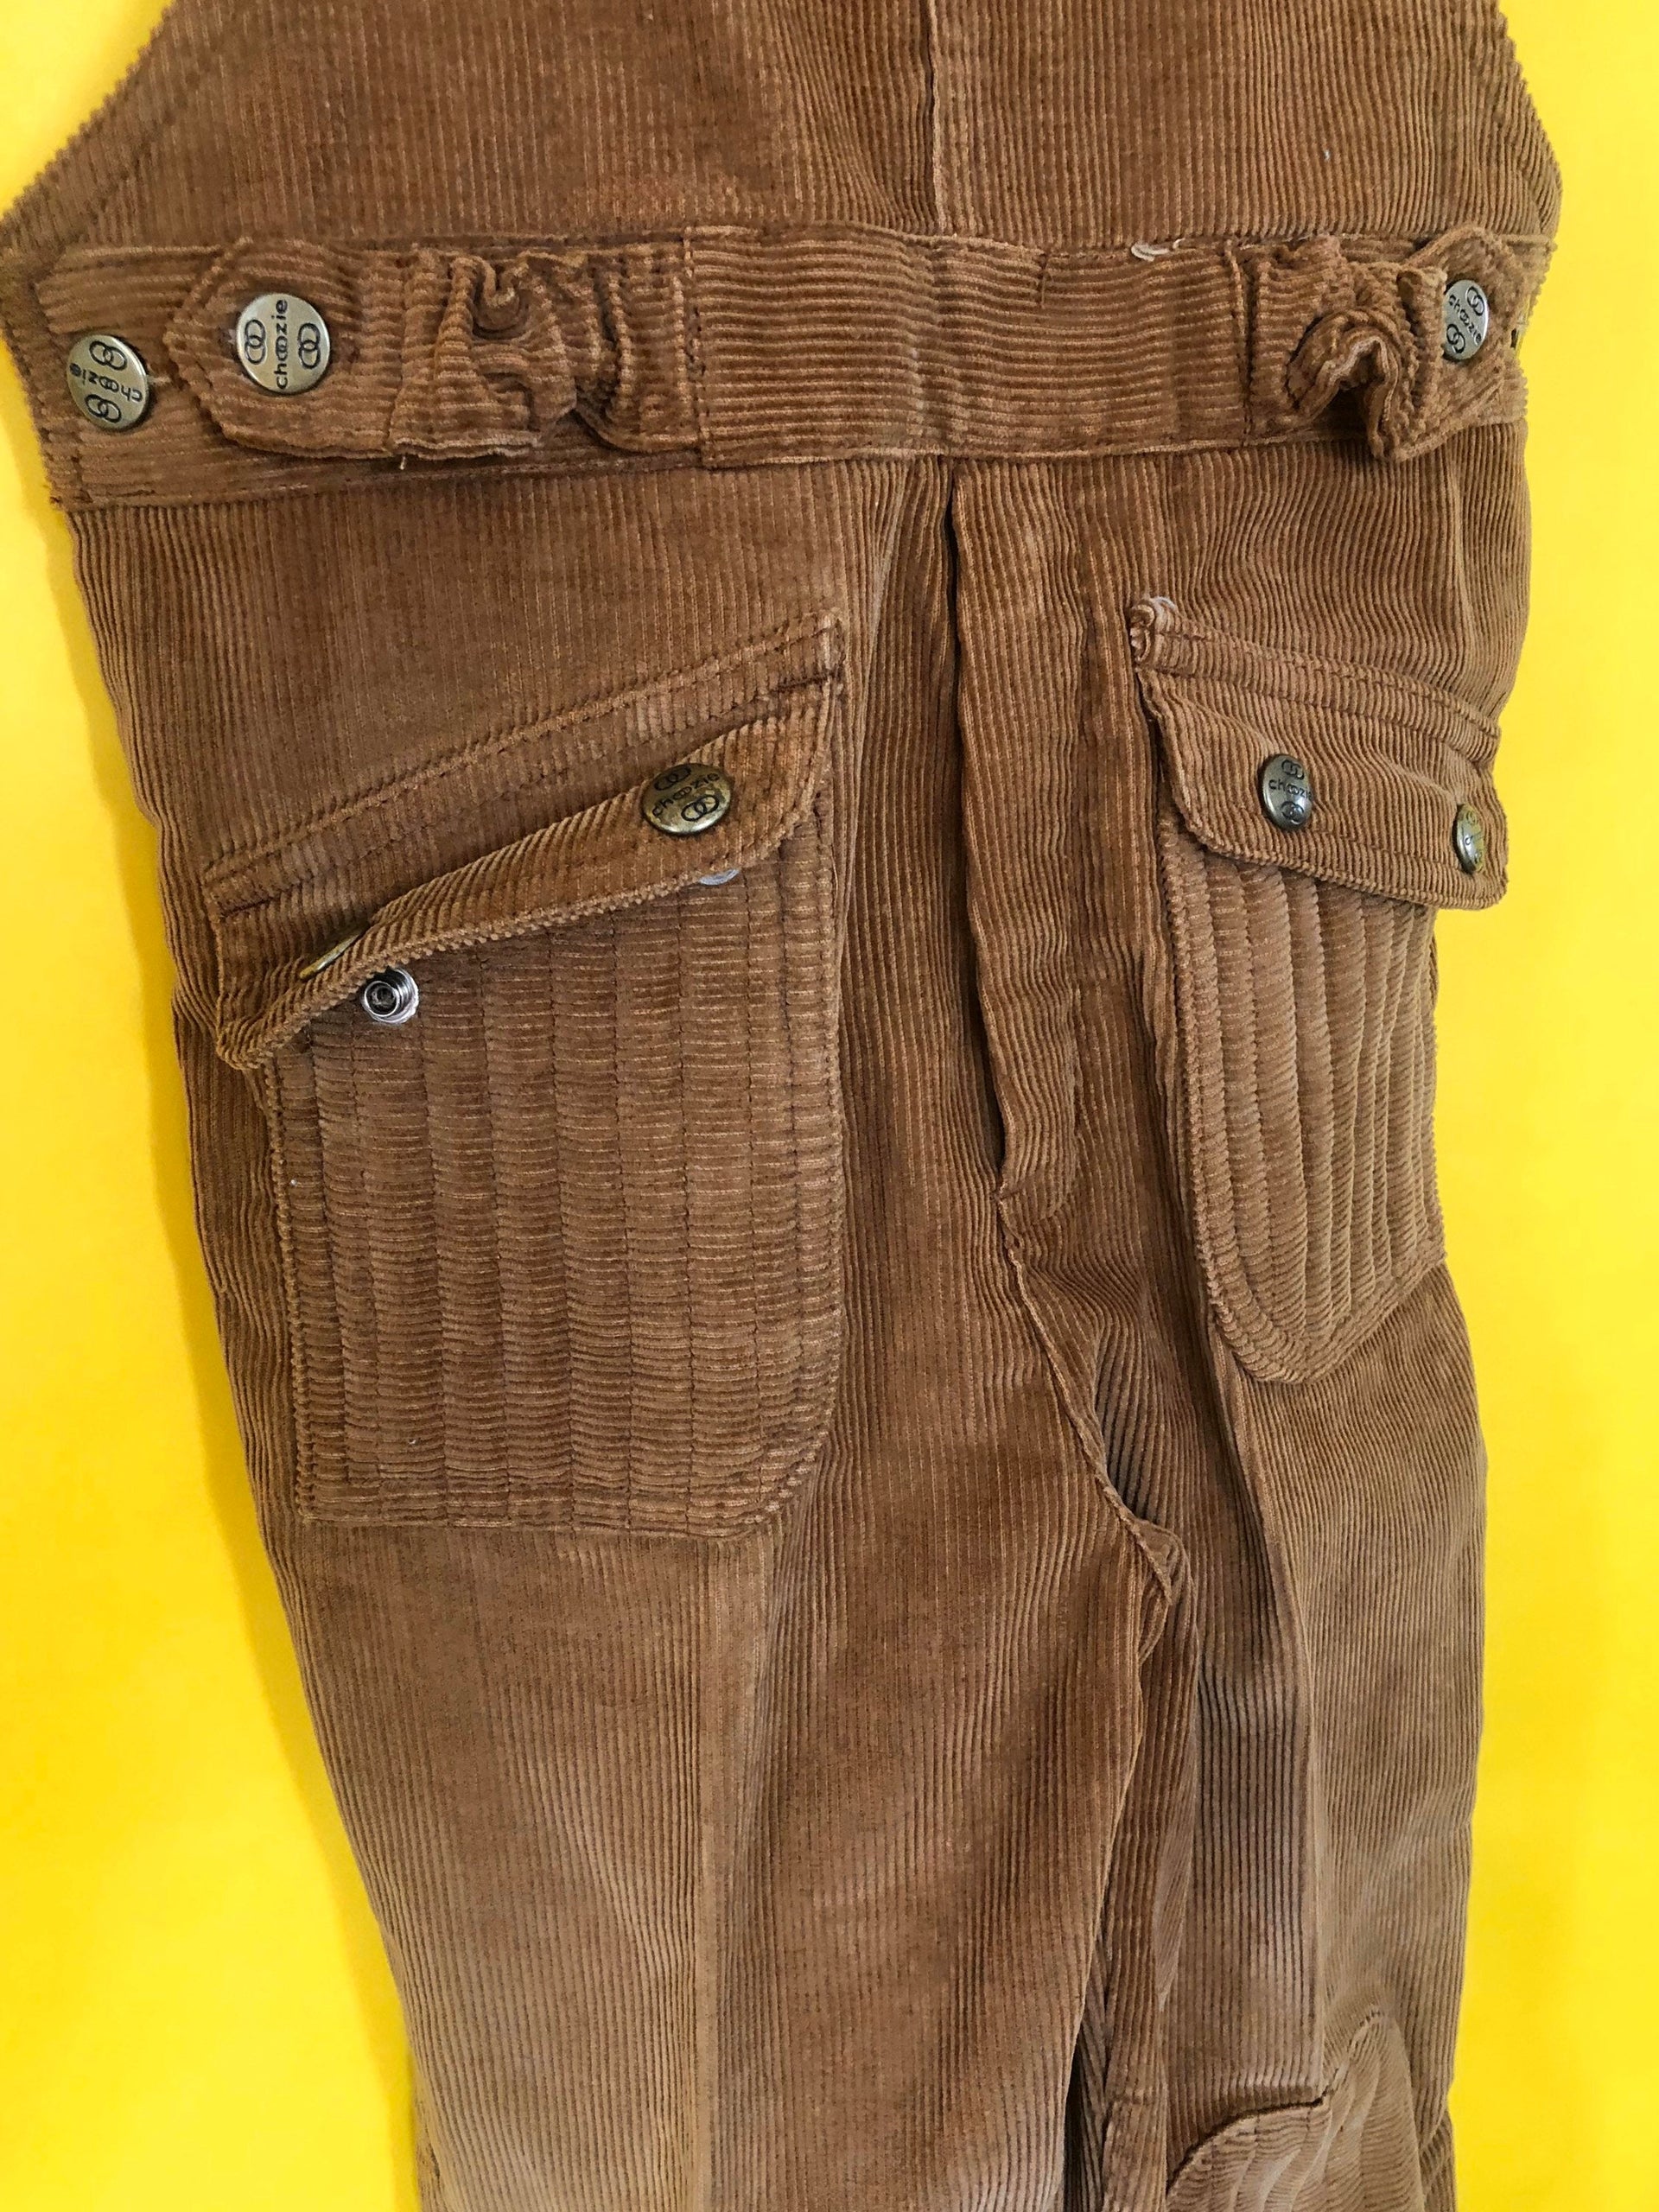 Girls 1970s vintage corduroy overalls by Choozie Brand